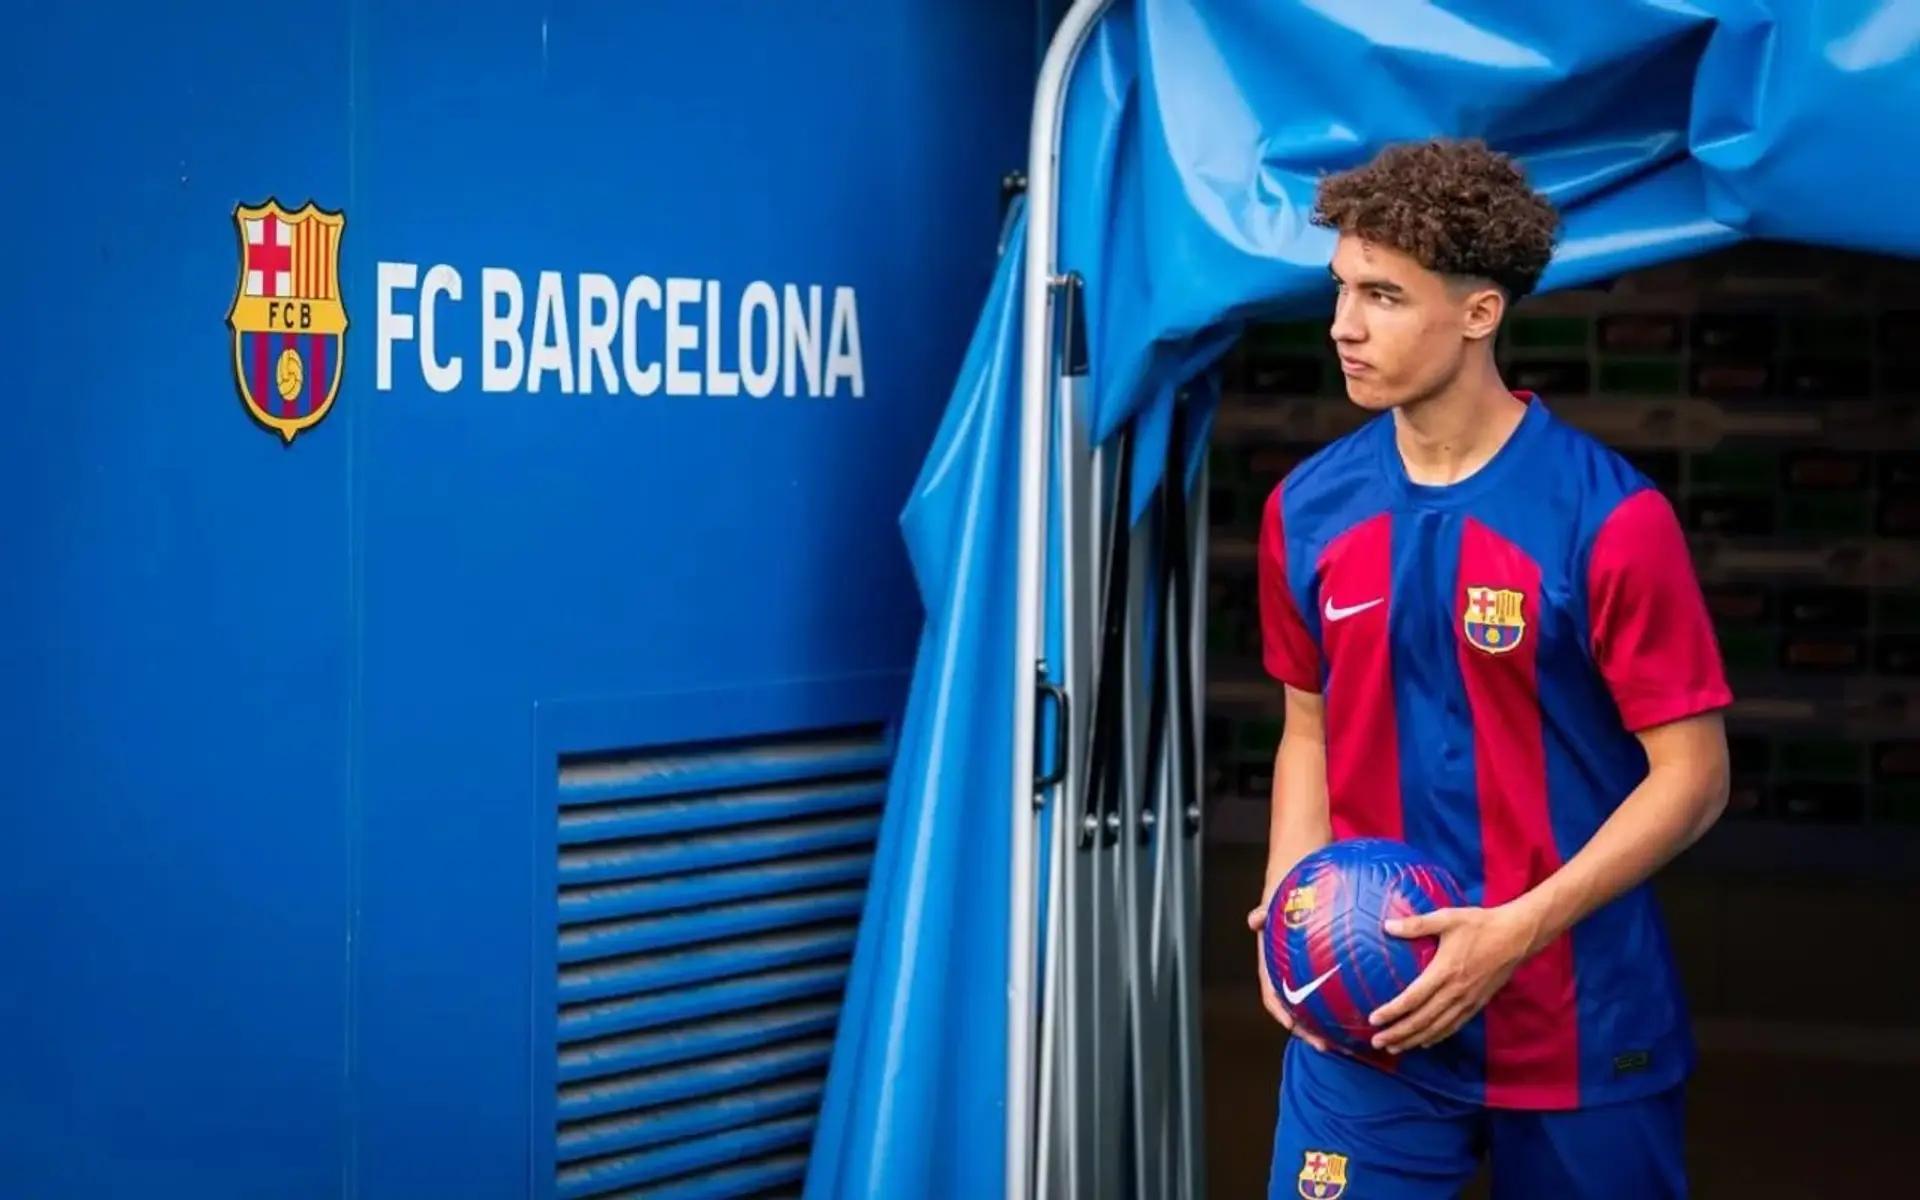 Barcelona sign Football - at €1,000,000,000 clause wonderkid, release set German